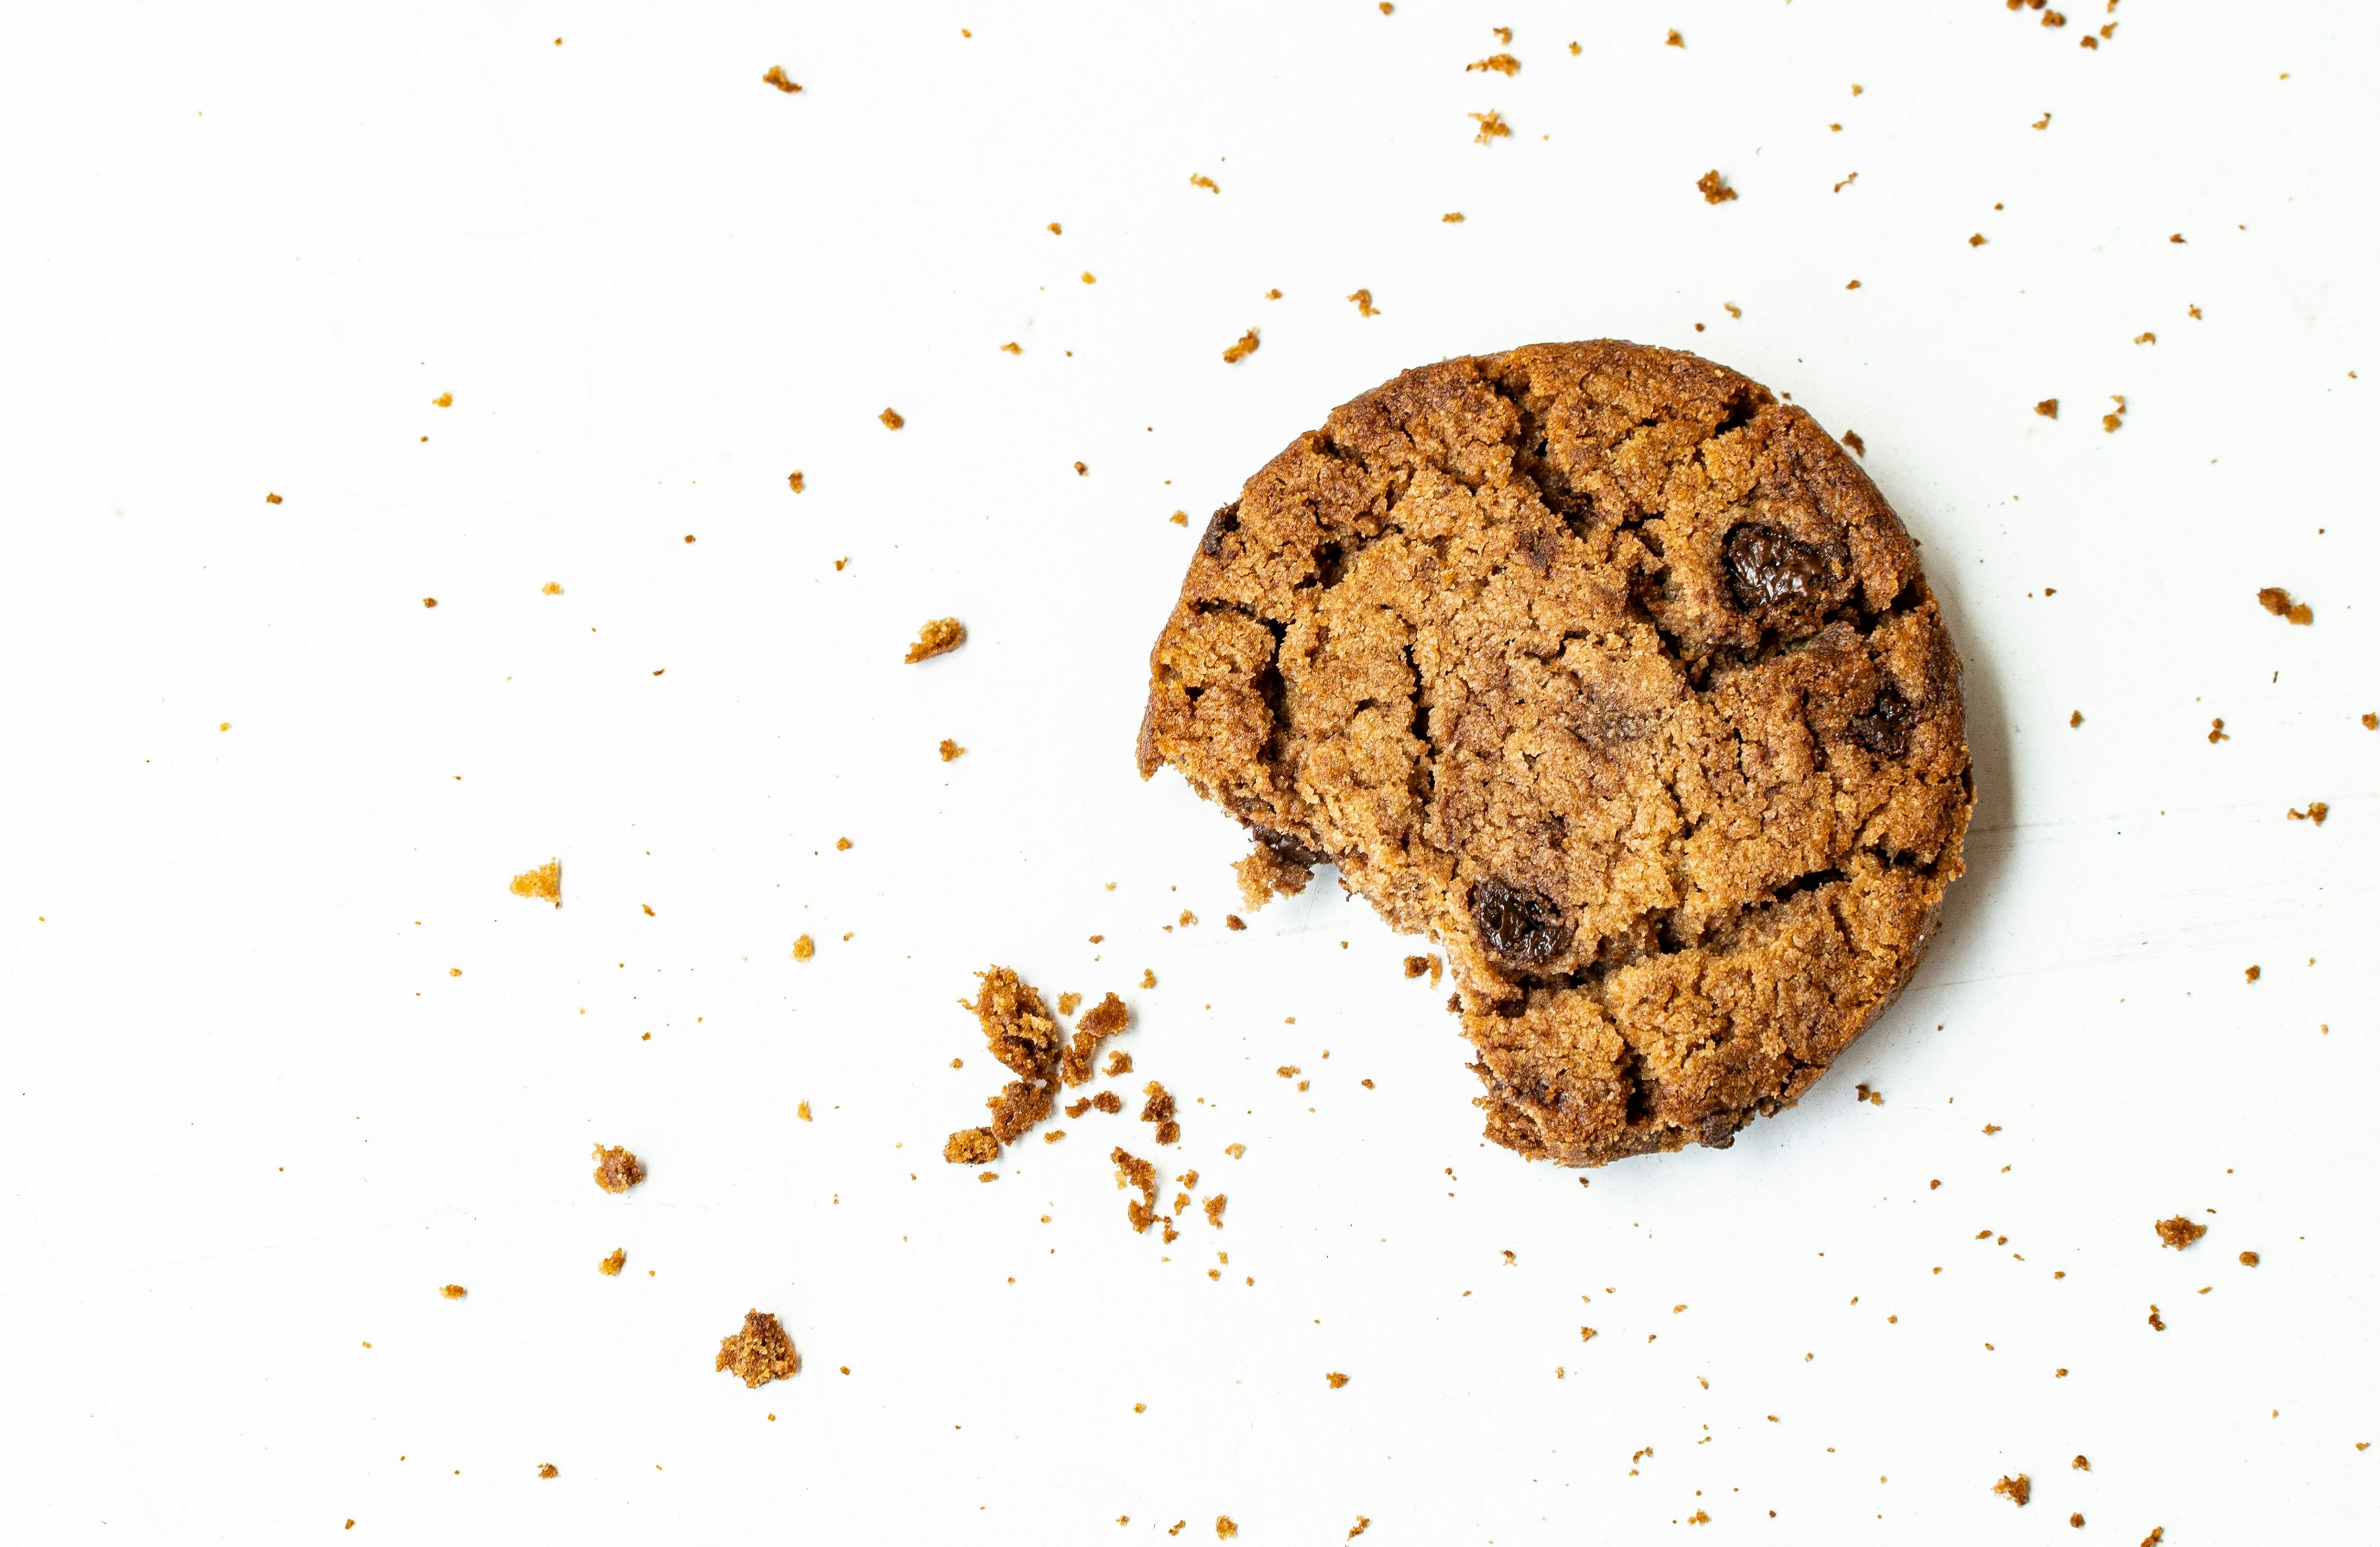 third-party-cookies - image of a cookie